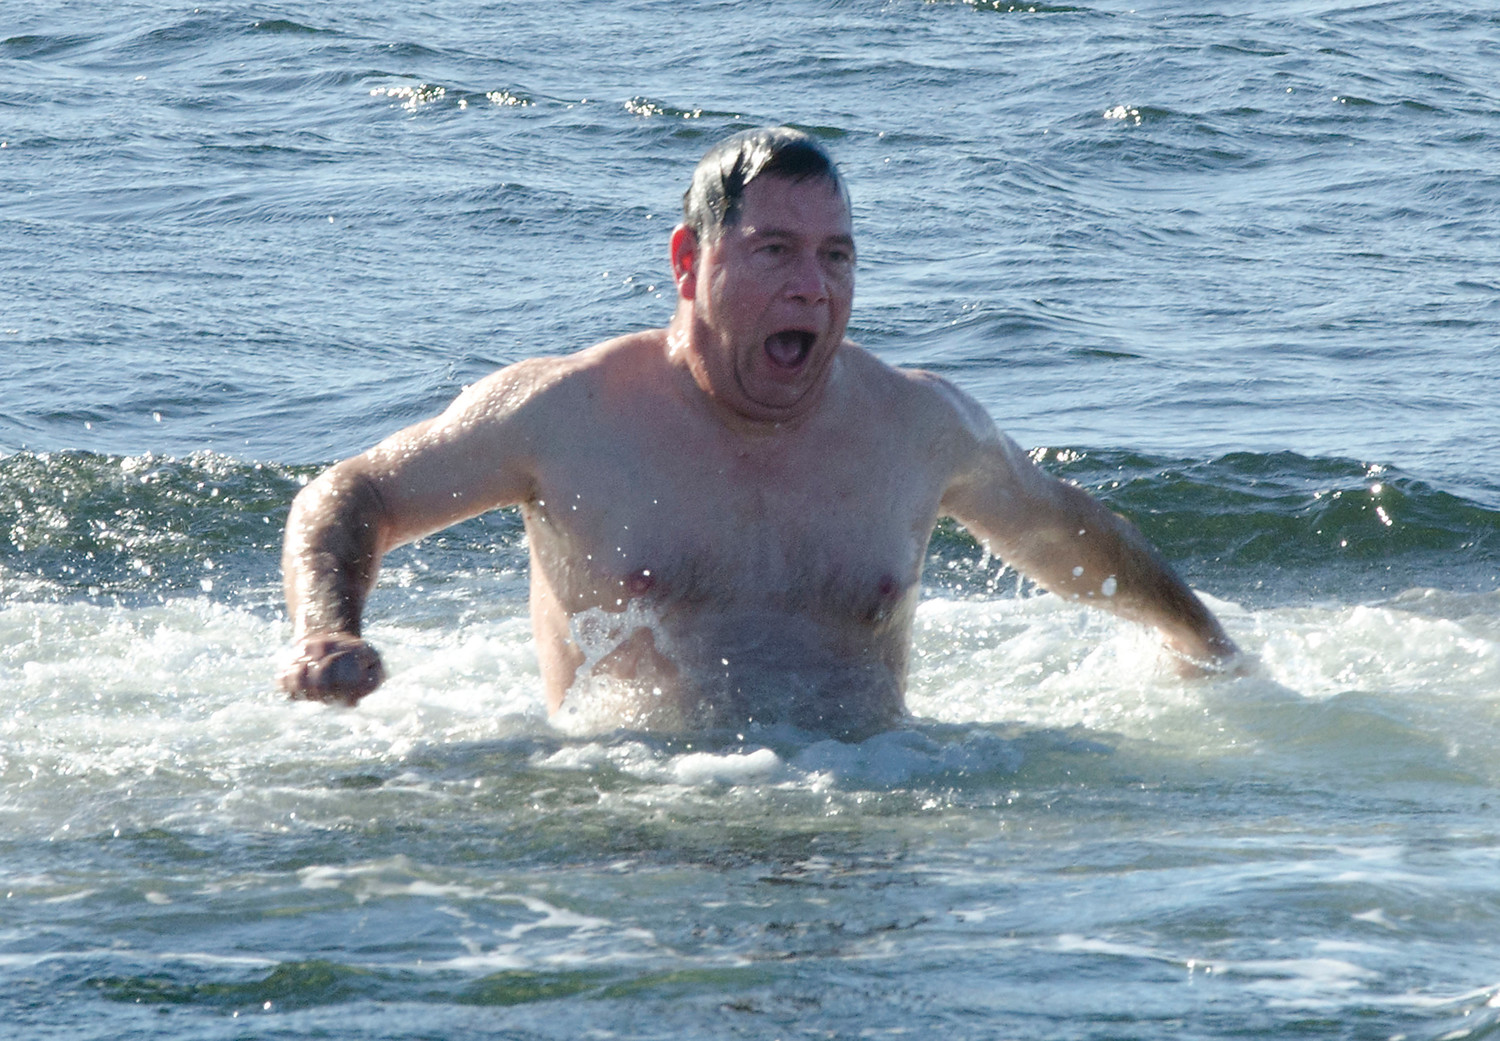 Todd Jeszale of Tiverton grimaces on his way out of the water at Tiverton’s Grinnell’s Beach. He went in alone at noon after the penguin plunge was cancelled for safety reasons.